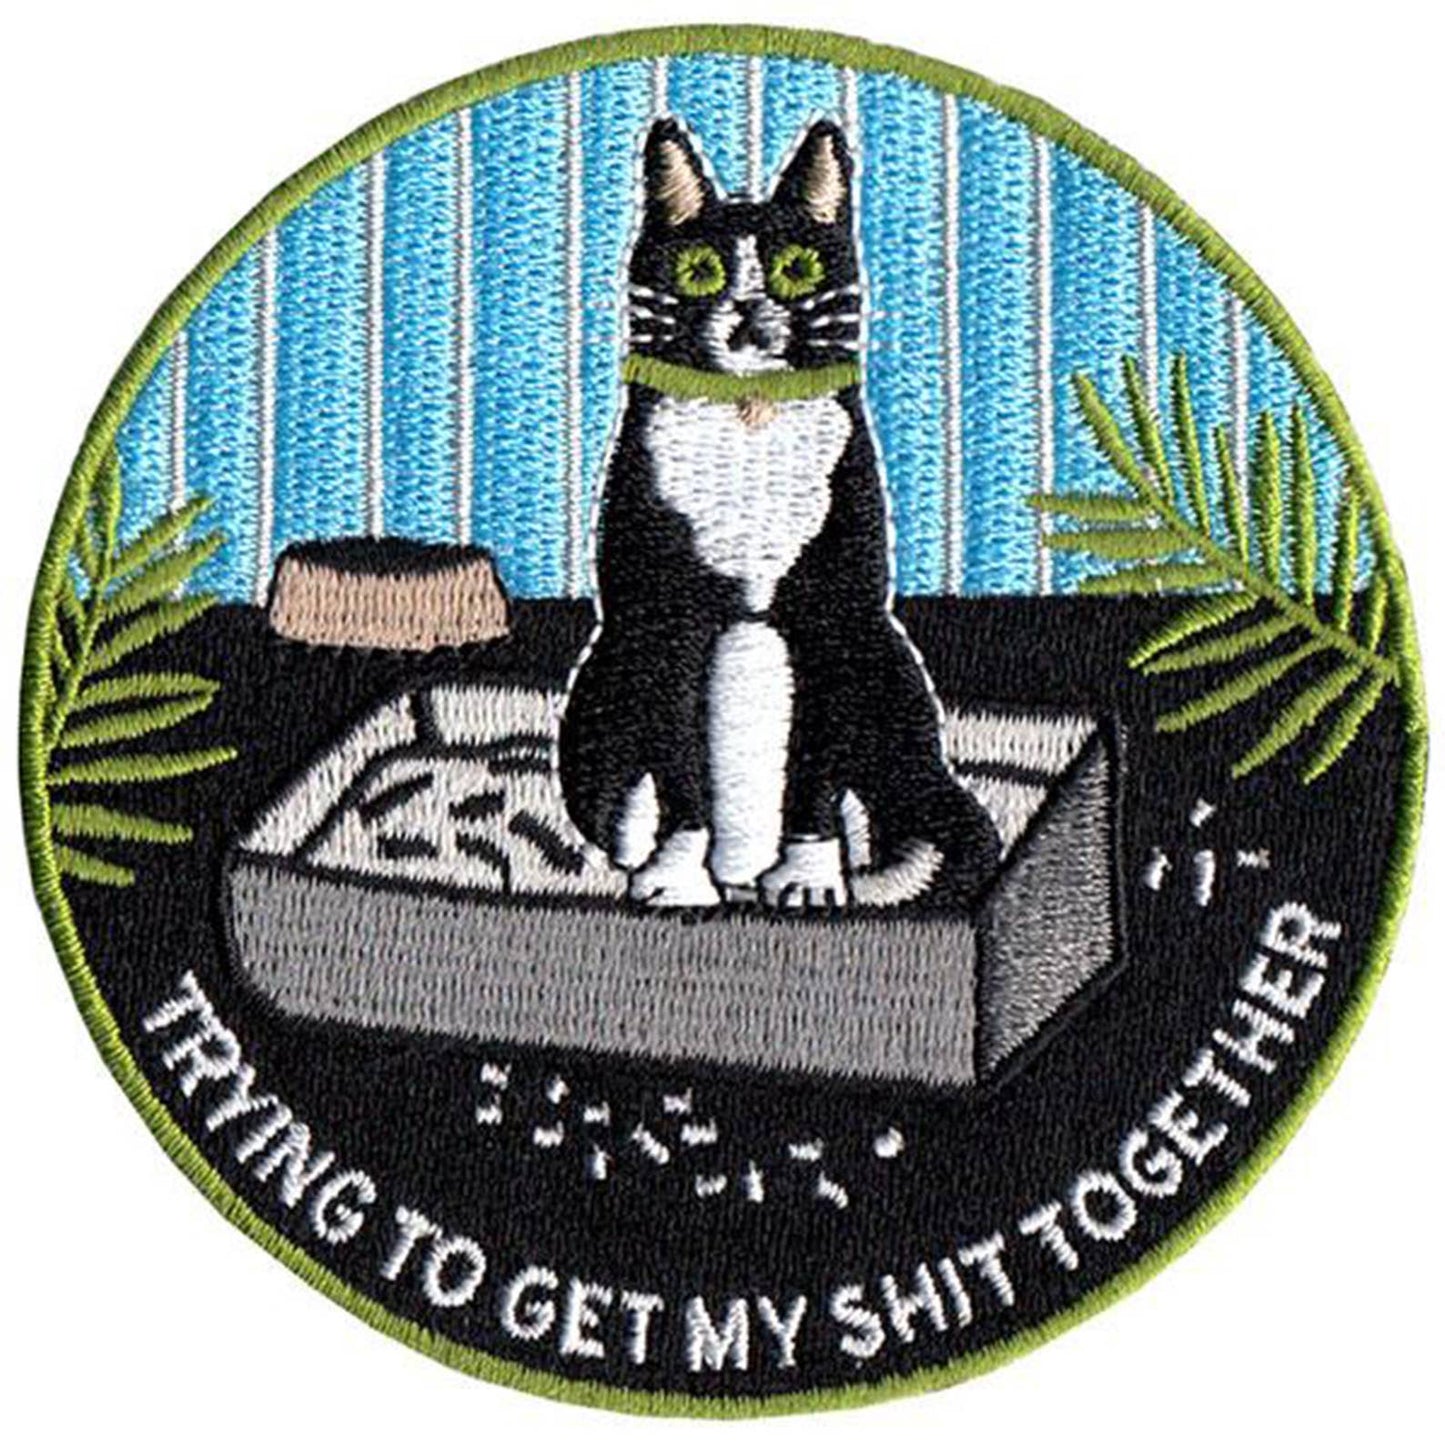 Trying to get my Sh*t Together Cat Patch